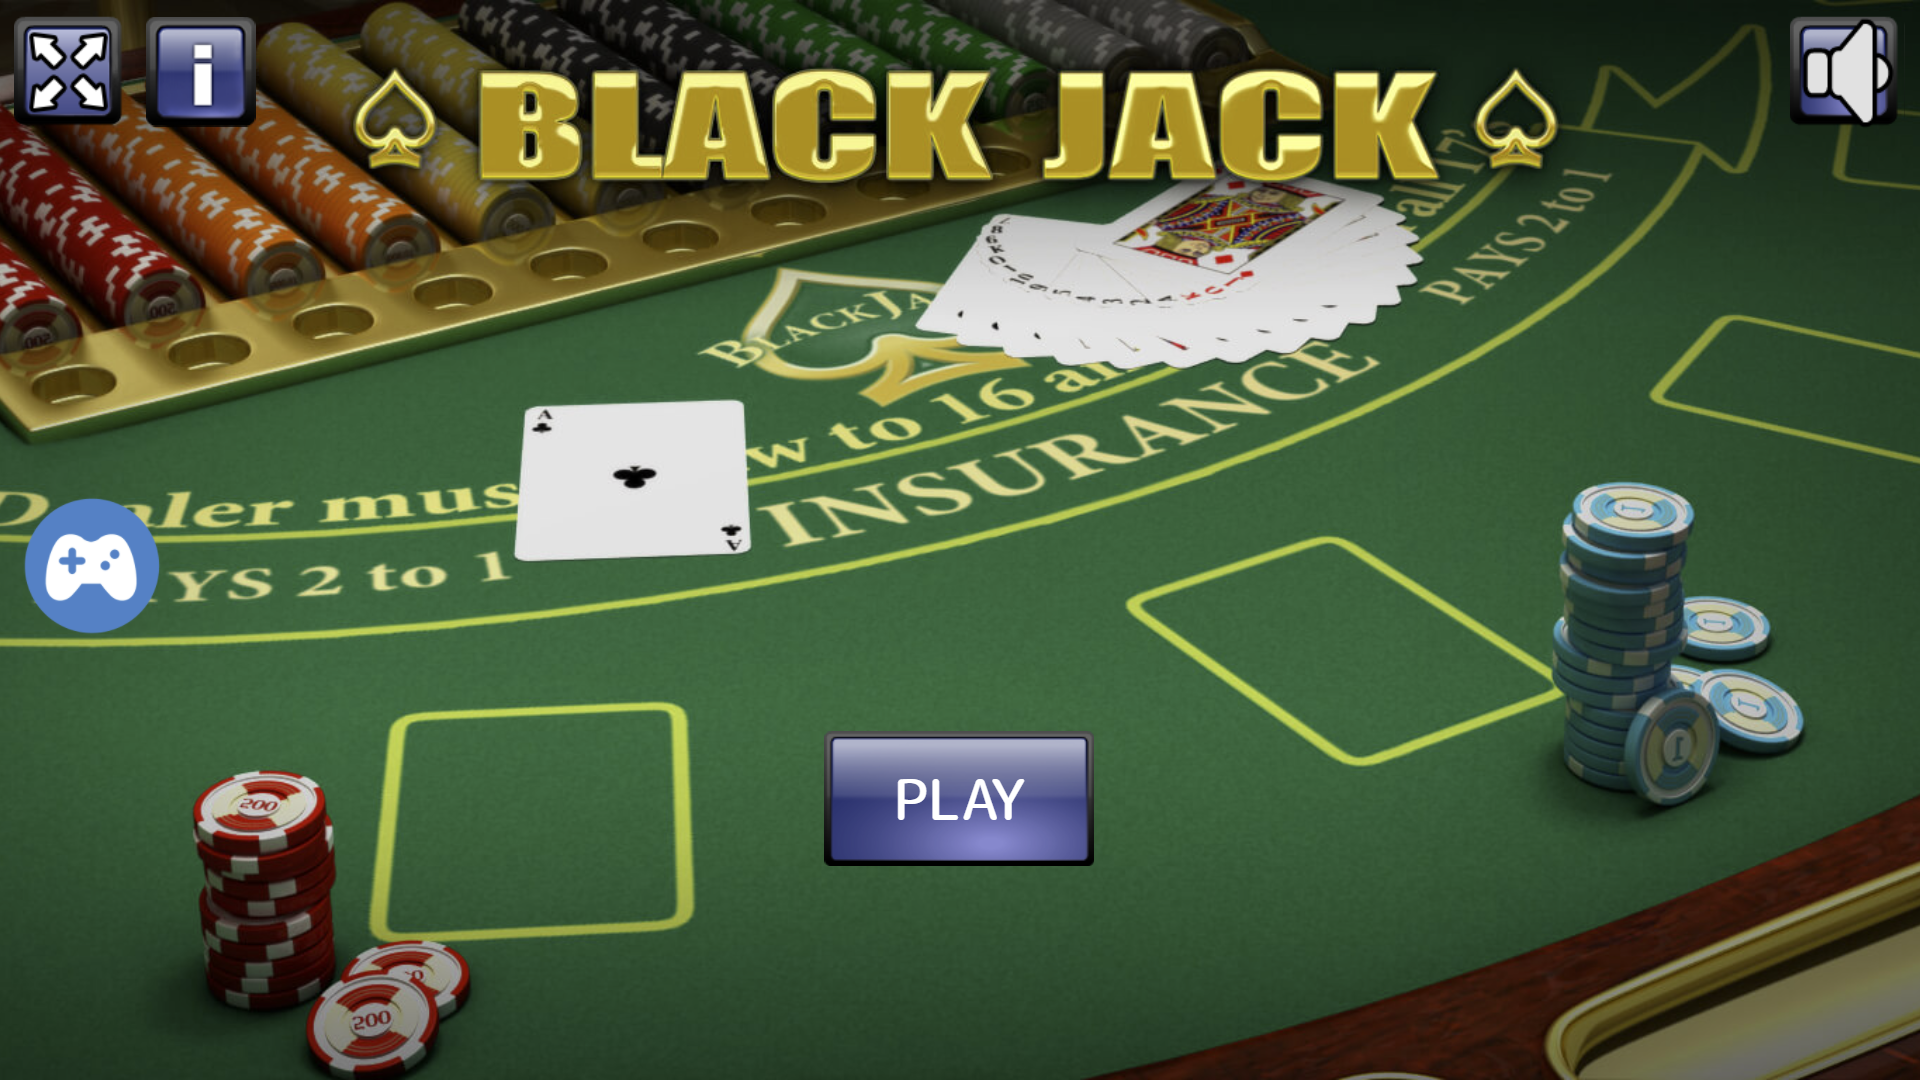 How to Join the Action with Blackjack Online?